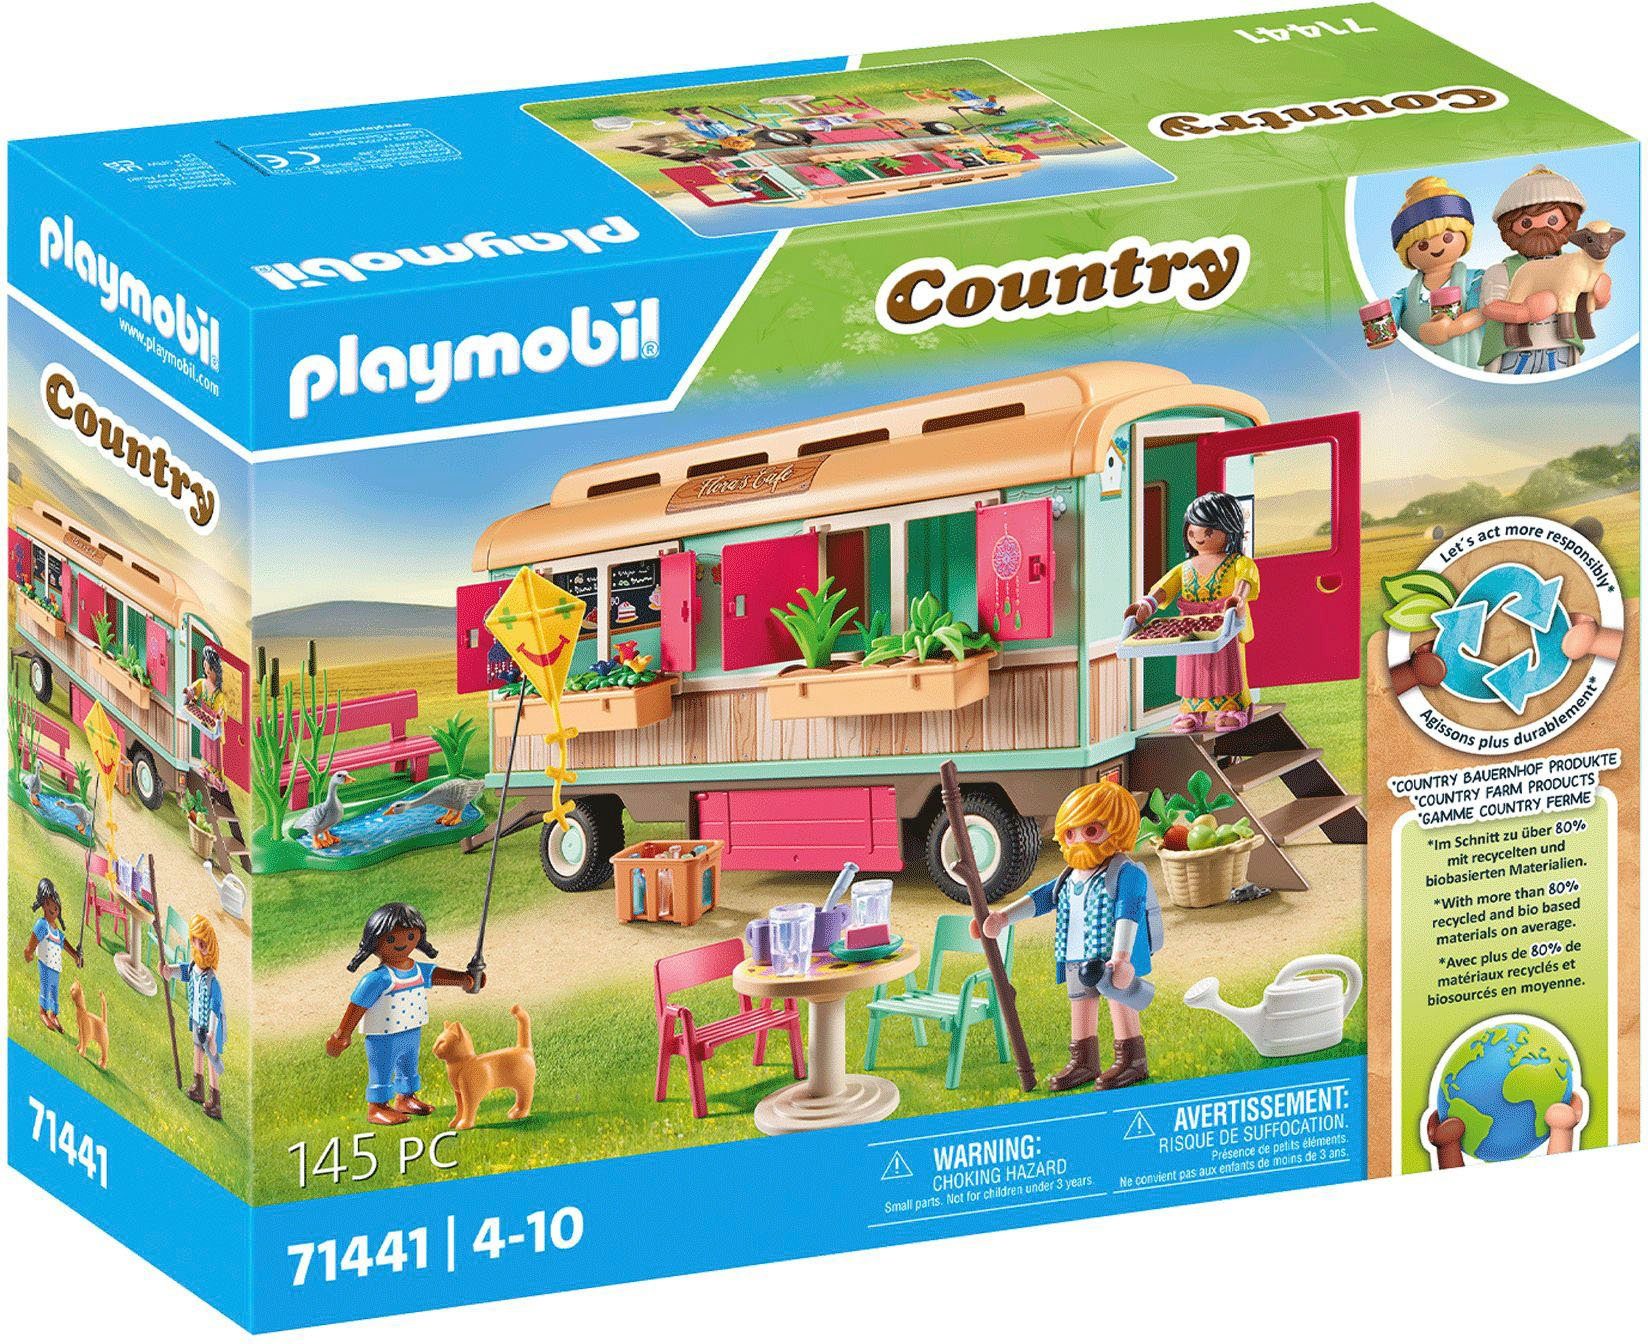 Playmobil® Konstruktions-Spielset Gemütliches Bauwagencafé (71441), Country, (145 St), teilweise aus recyceltem Material; Made in Germany